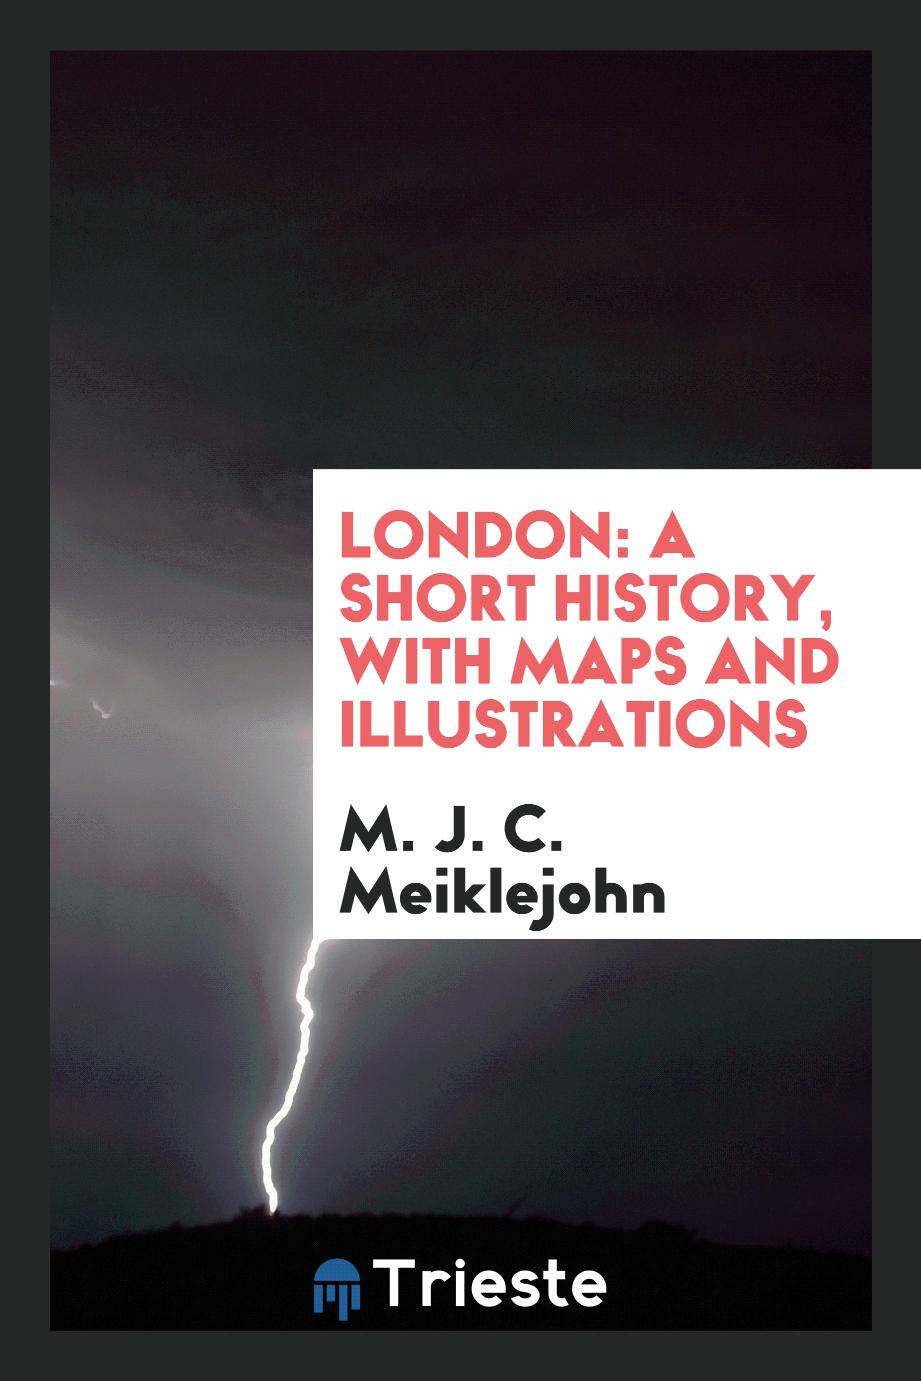 London: A Short History, with Maps and Illustrations